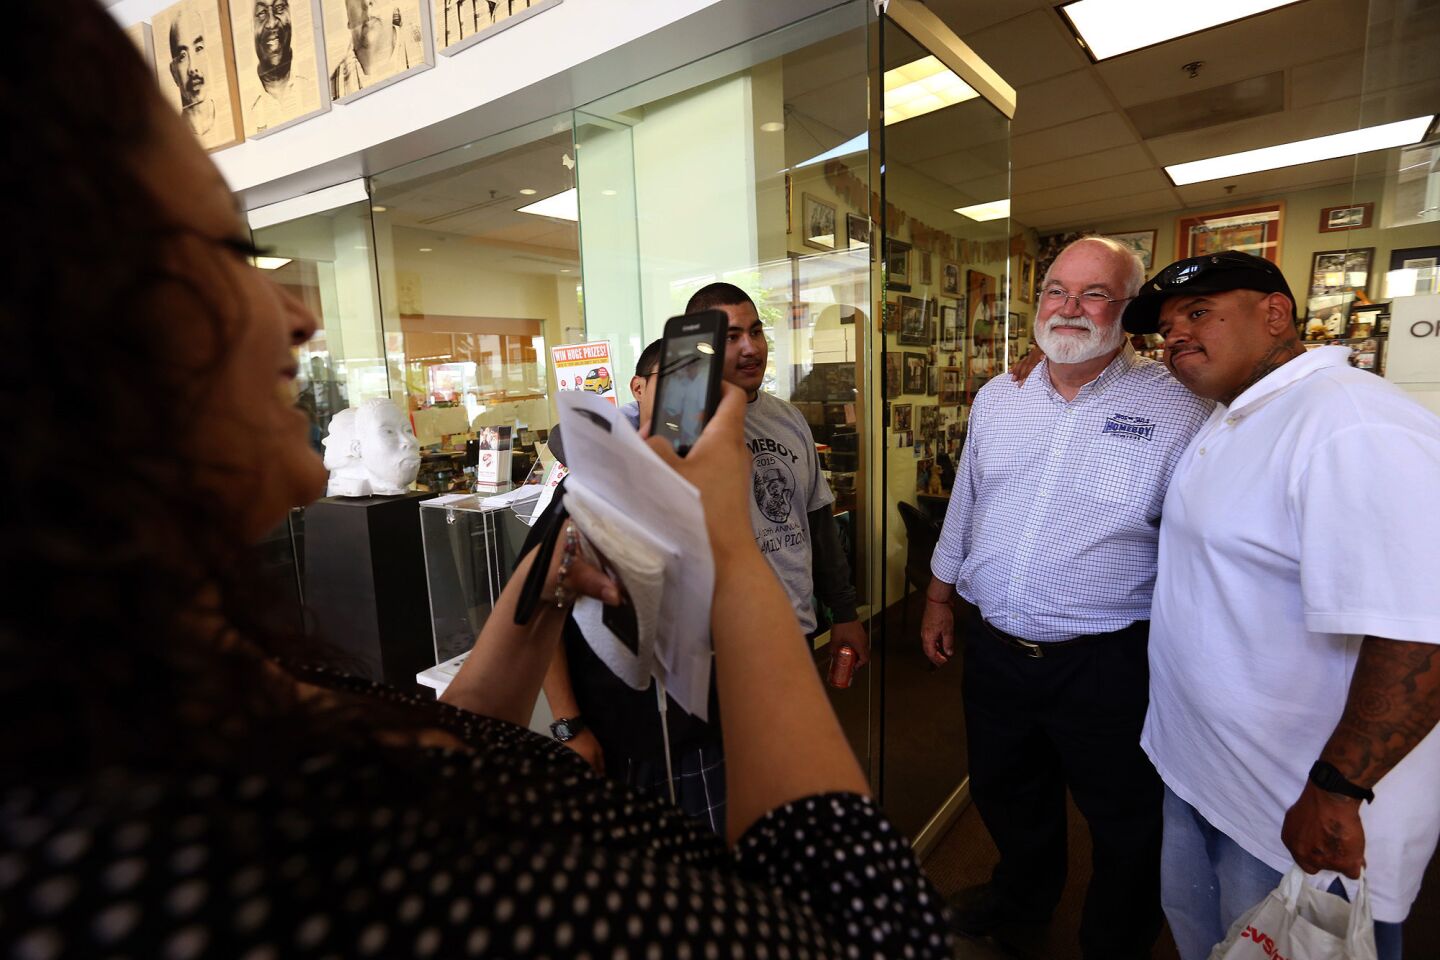 Rosemary Estrada takes a picture of Father Gregory Boyle with one of the men he mentors at Homeboy Industries.